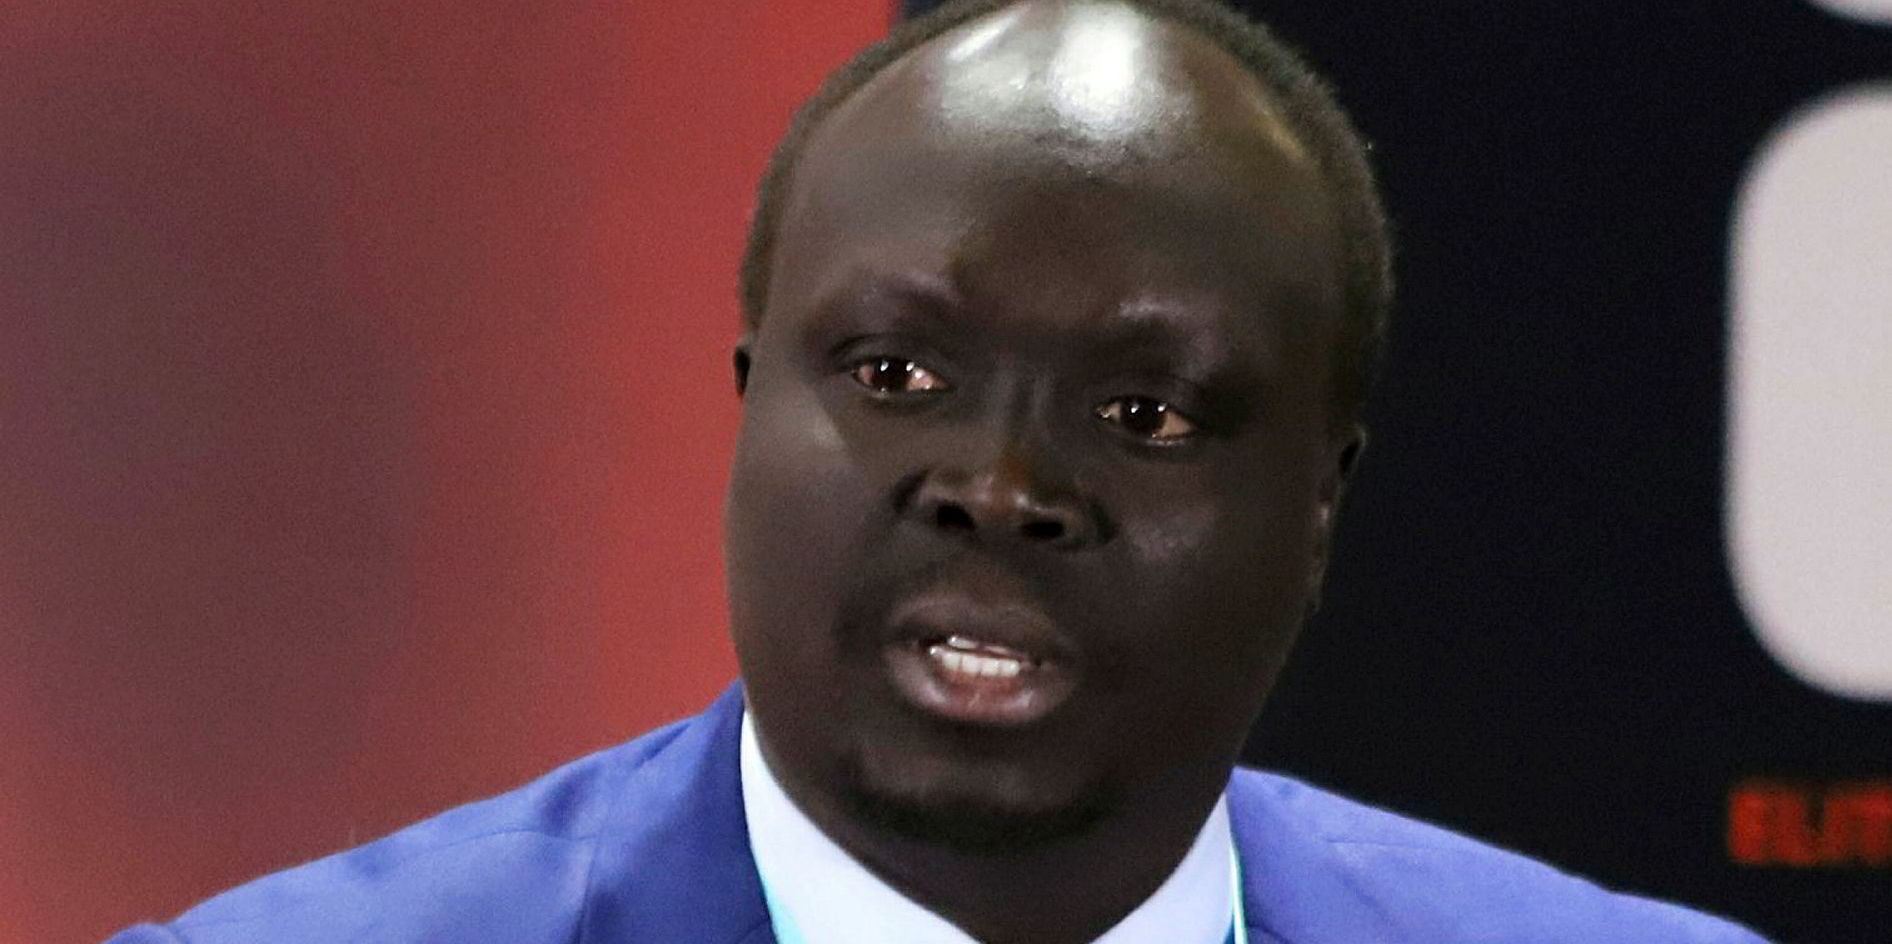 Kiir appoints Engineer to head Finance Ministry